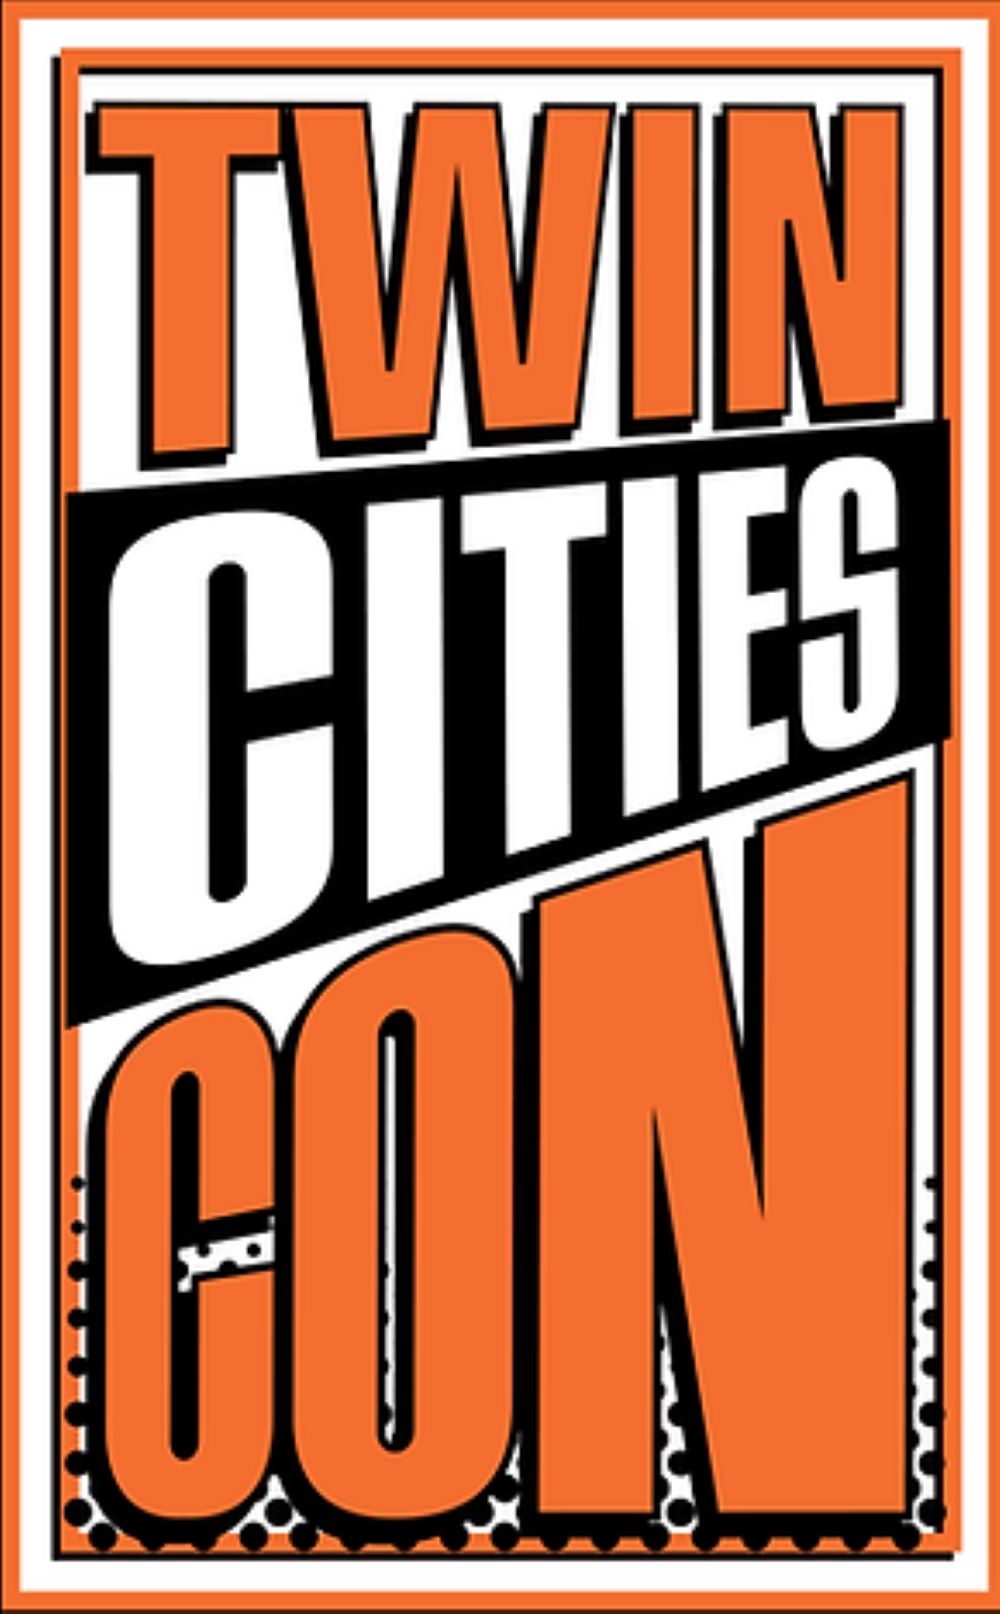 Twin Cities Con 2023